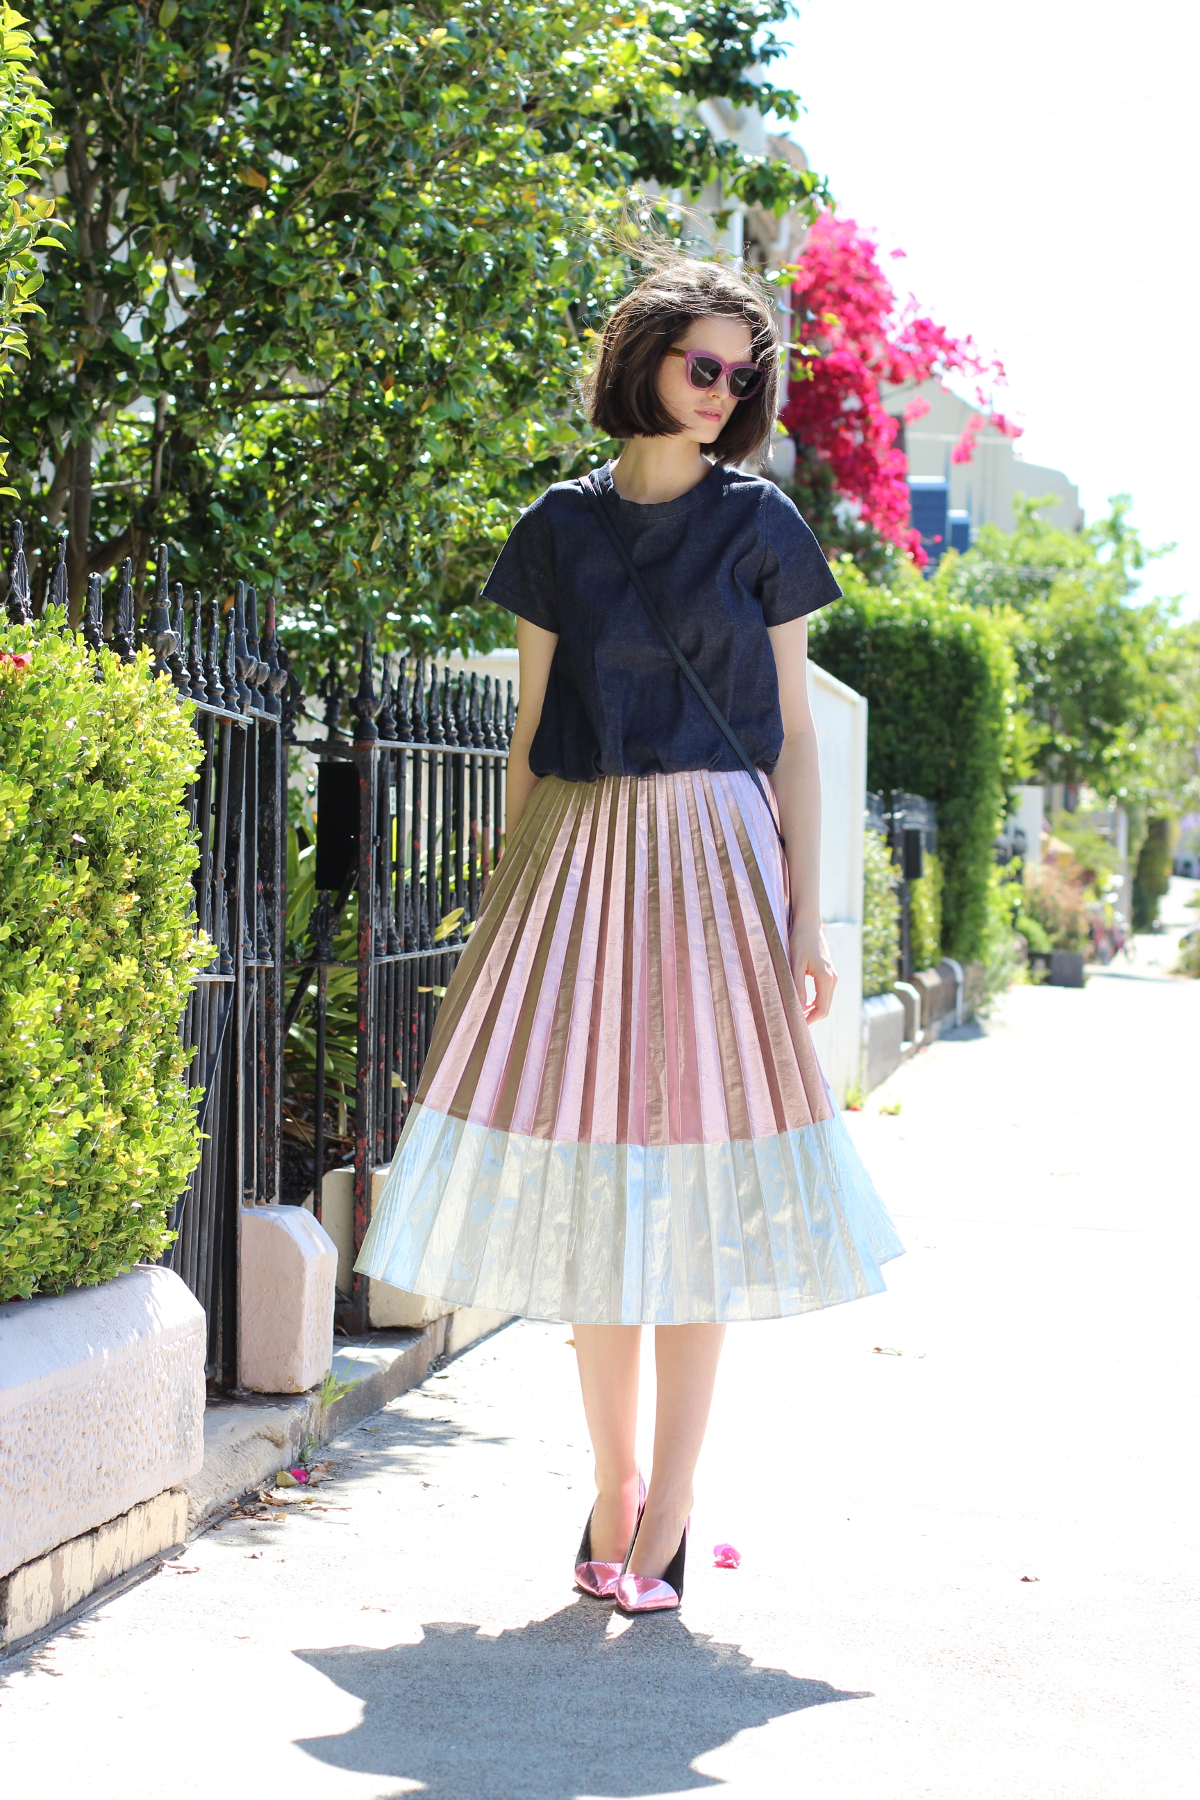 BYCHILL SYDNEY STYLE BLOG Chloe Hill Wearing Soot the Label Denim poof top, Easton Pearson metallic skirt, Deadly Ponies bag, see by chloe metallic shoes and AM eyewear sunglasses